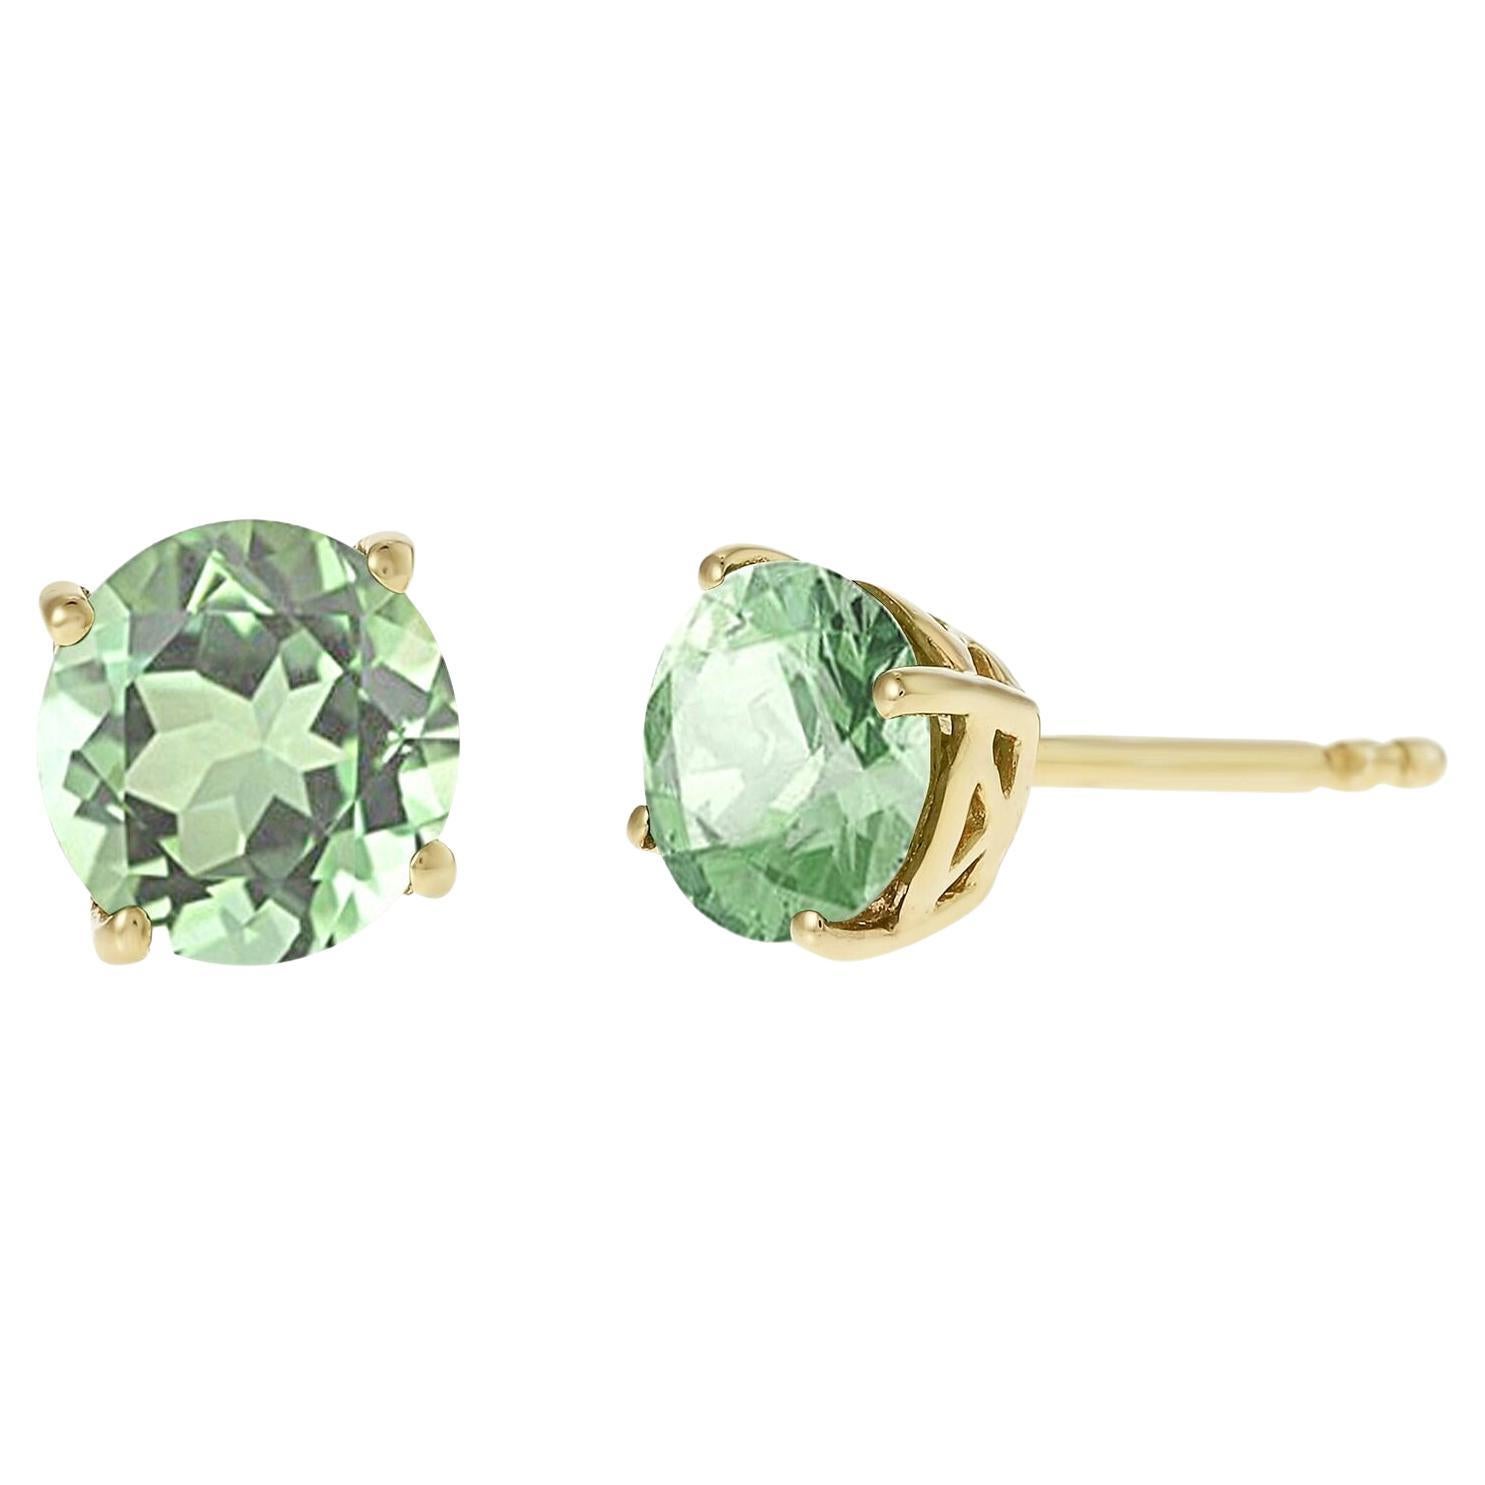 Green Quartz Four Prong Stud Earrings 14K Yellow Gold over .925 Sterling Silver